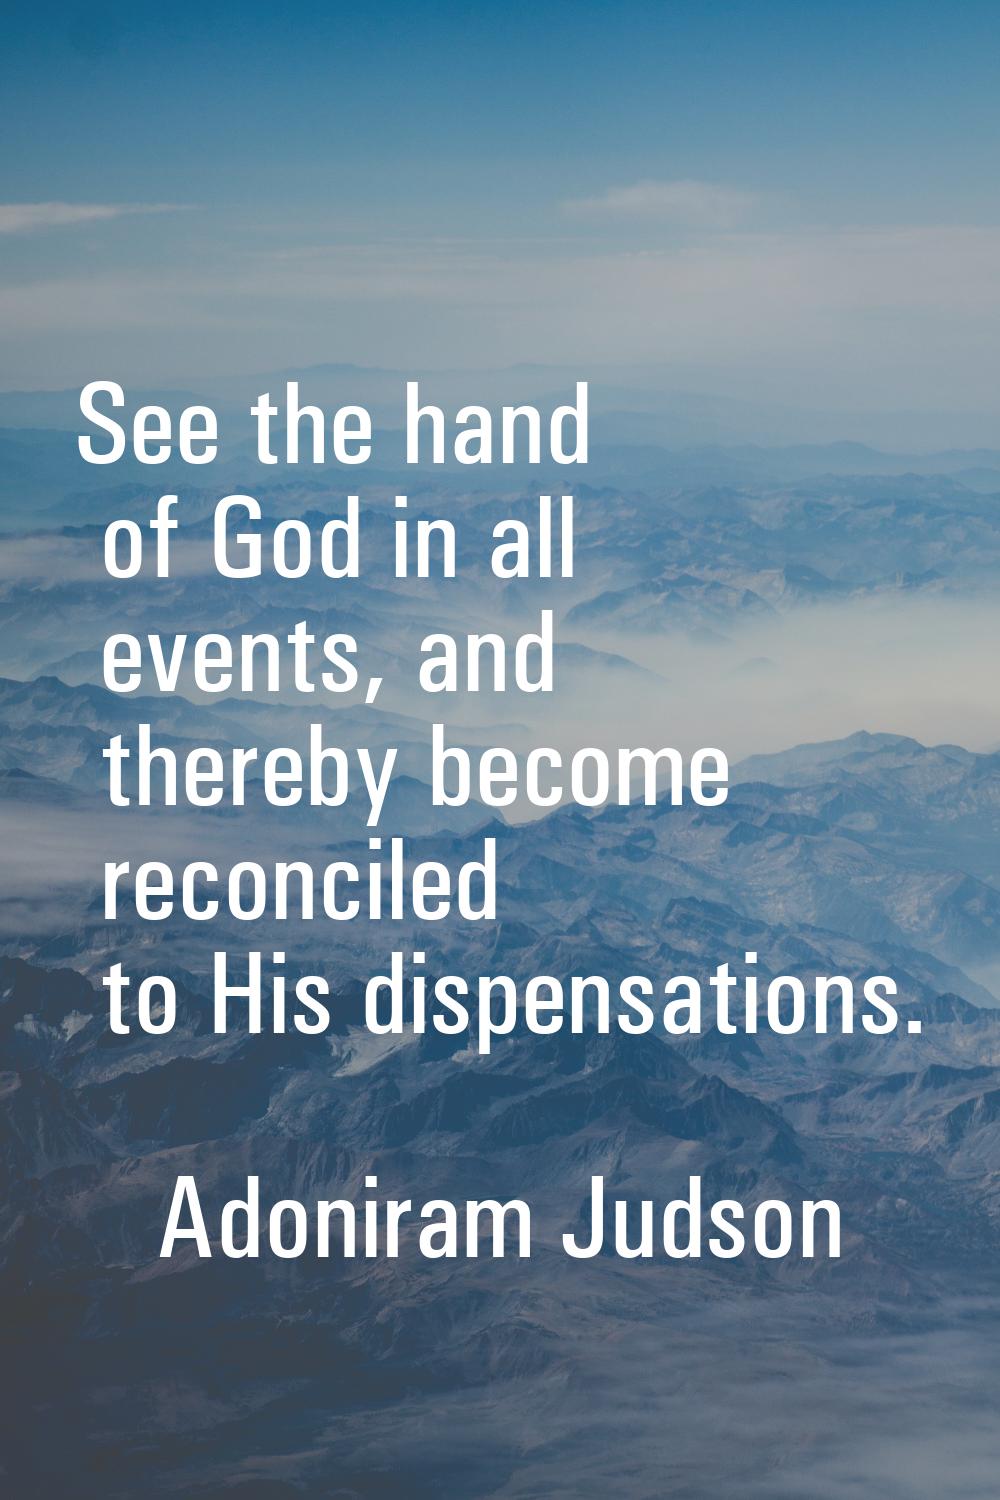 See the hand of God in all events, and thereby become reconciled to His dispensations.